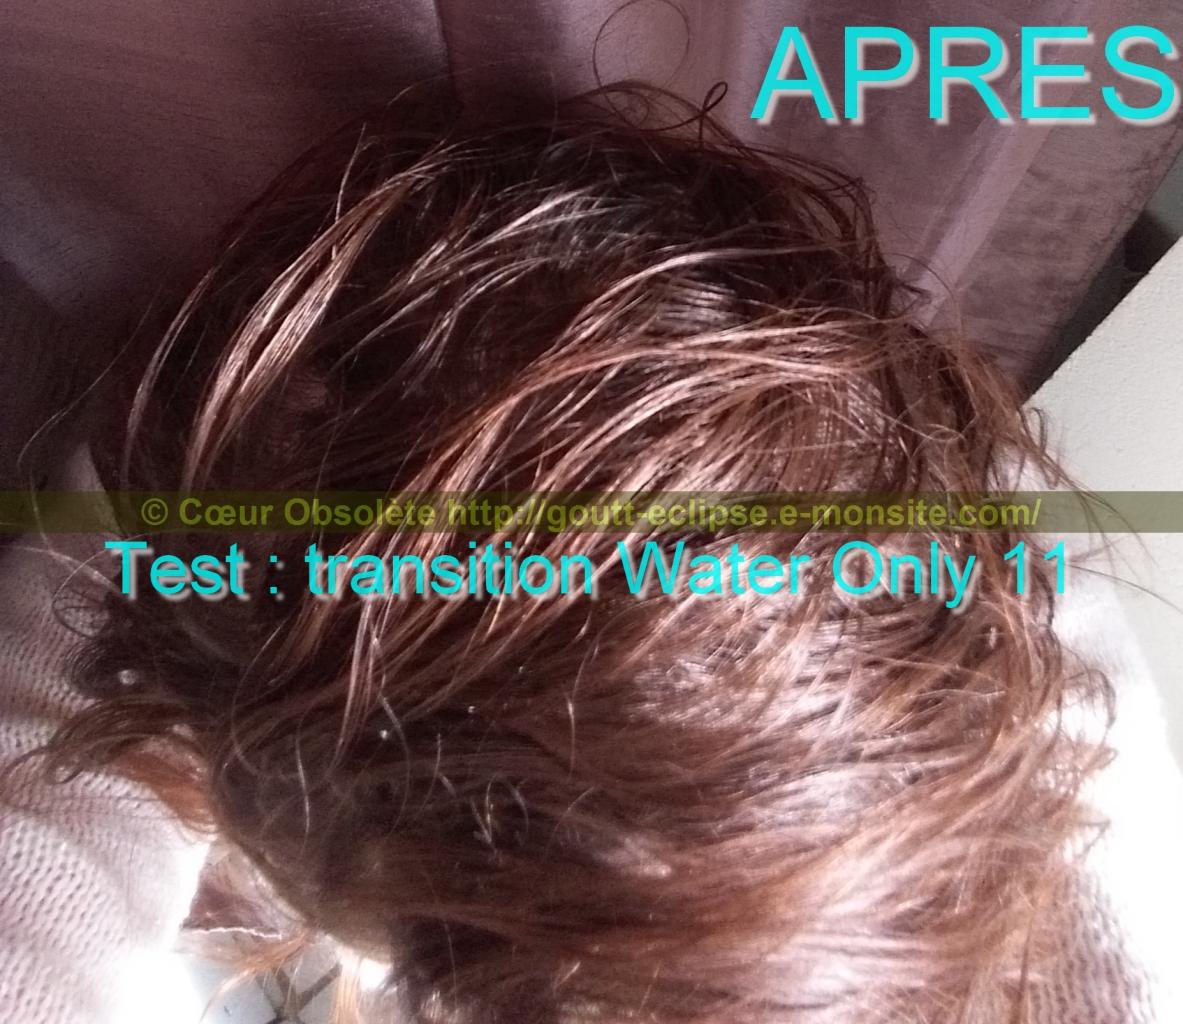 11 Fév 2018 Test Water Only Transition lavage N°11 photo APRES 31